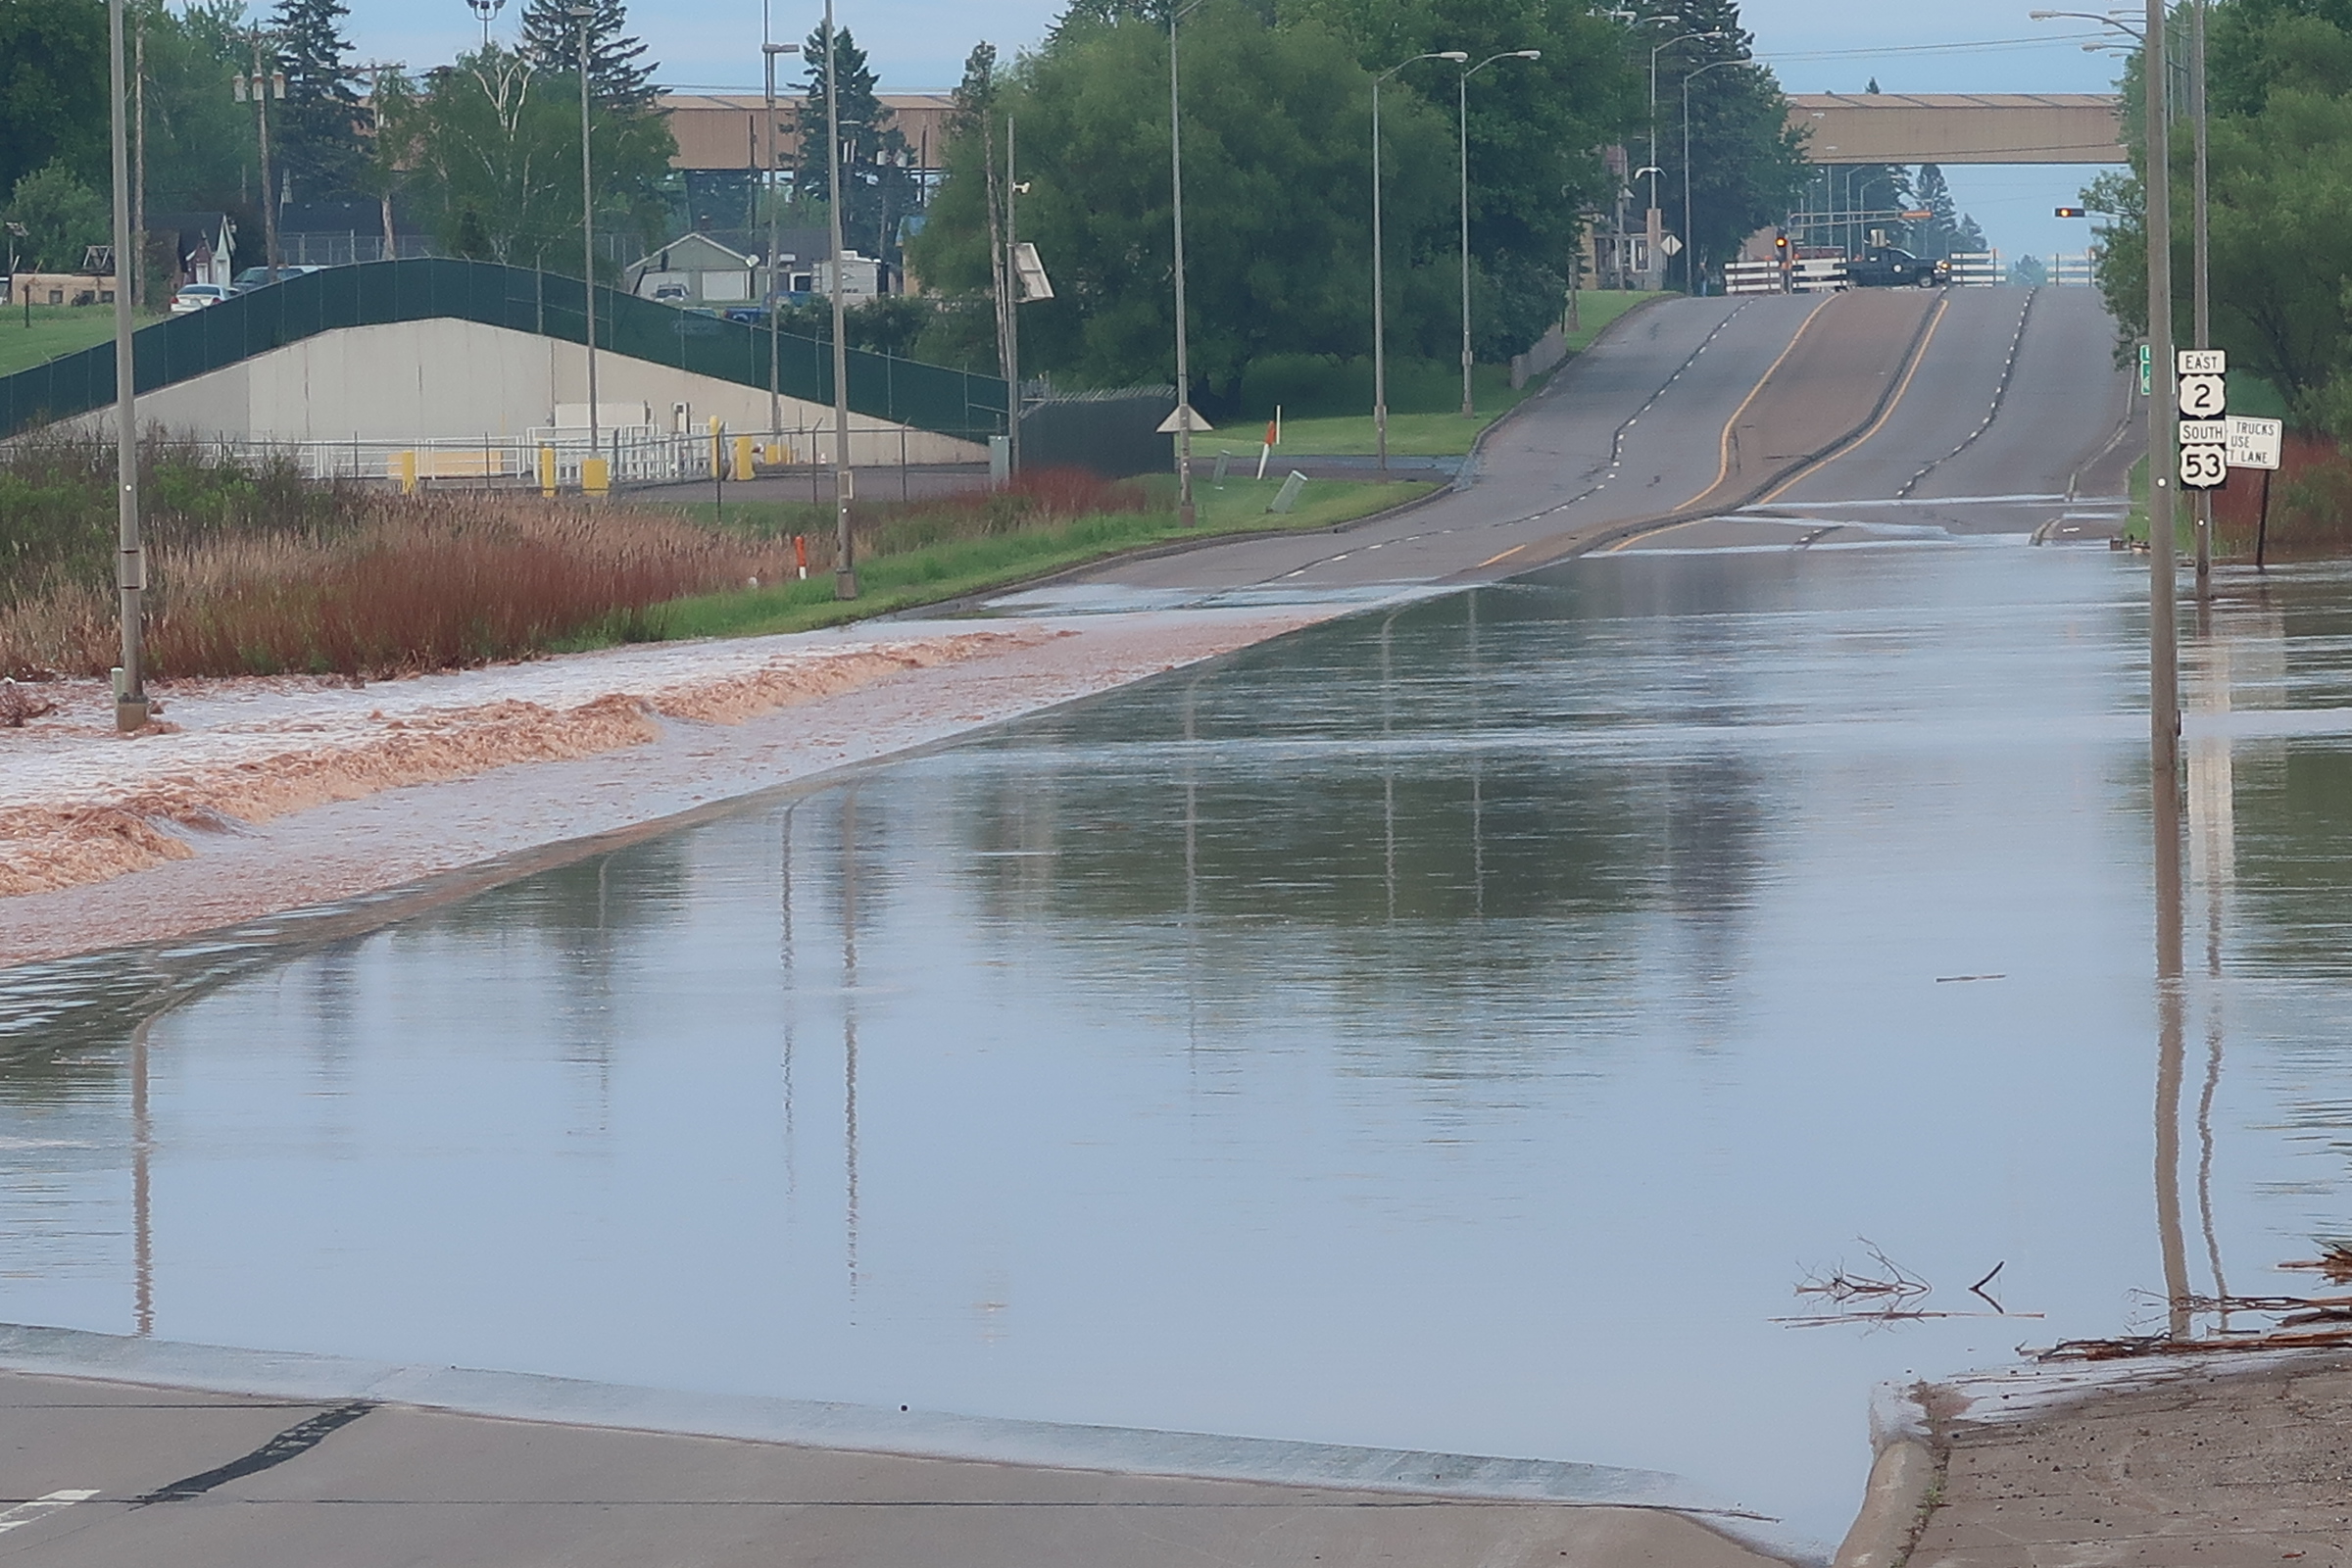 Roads closed in Superior, Wisconsin due to flooding after heavy rainfall